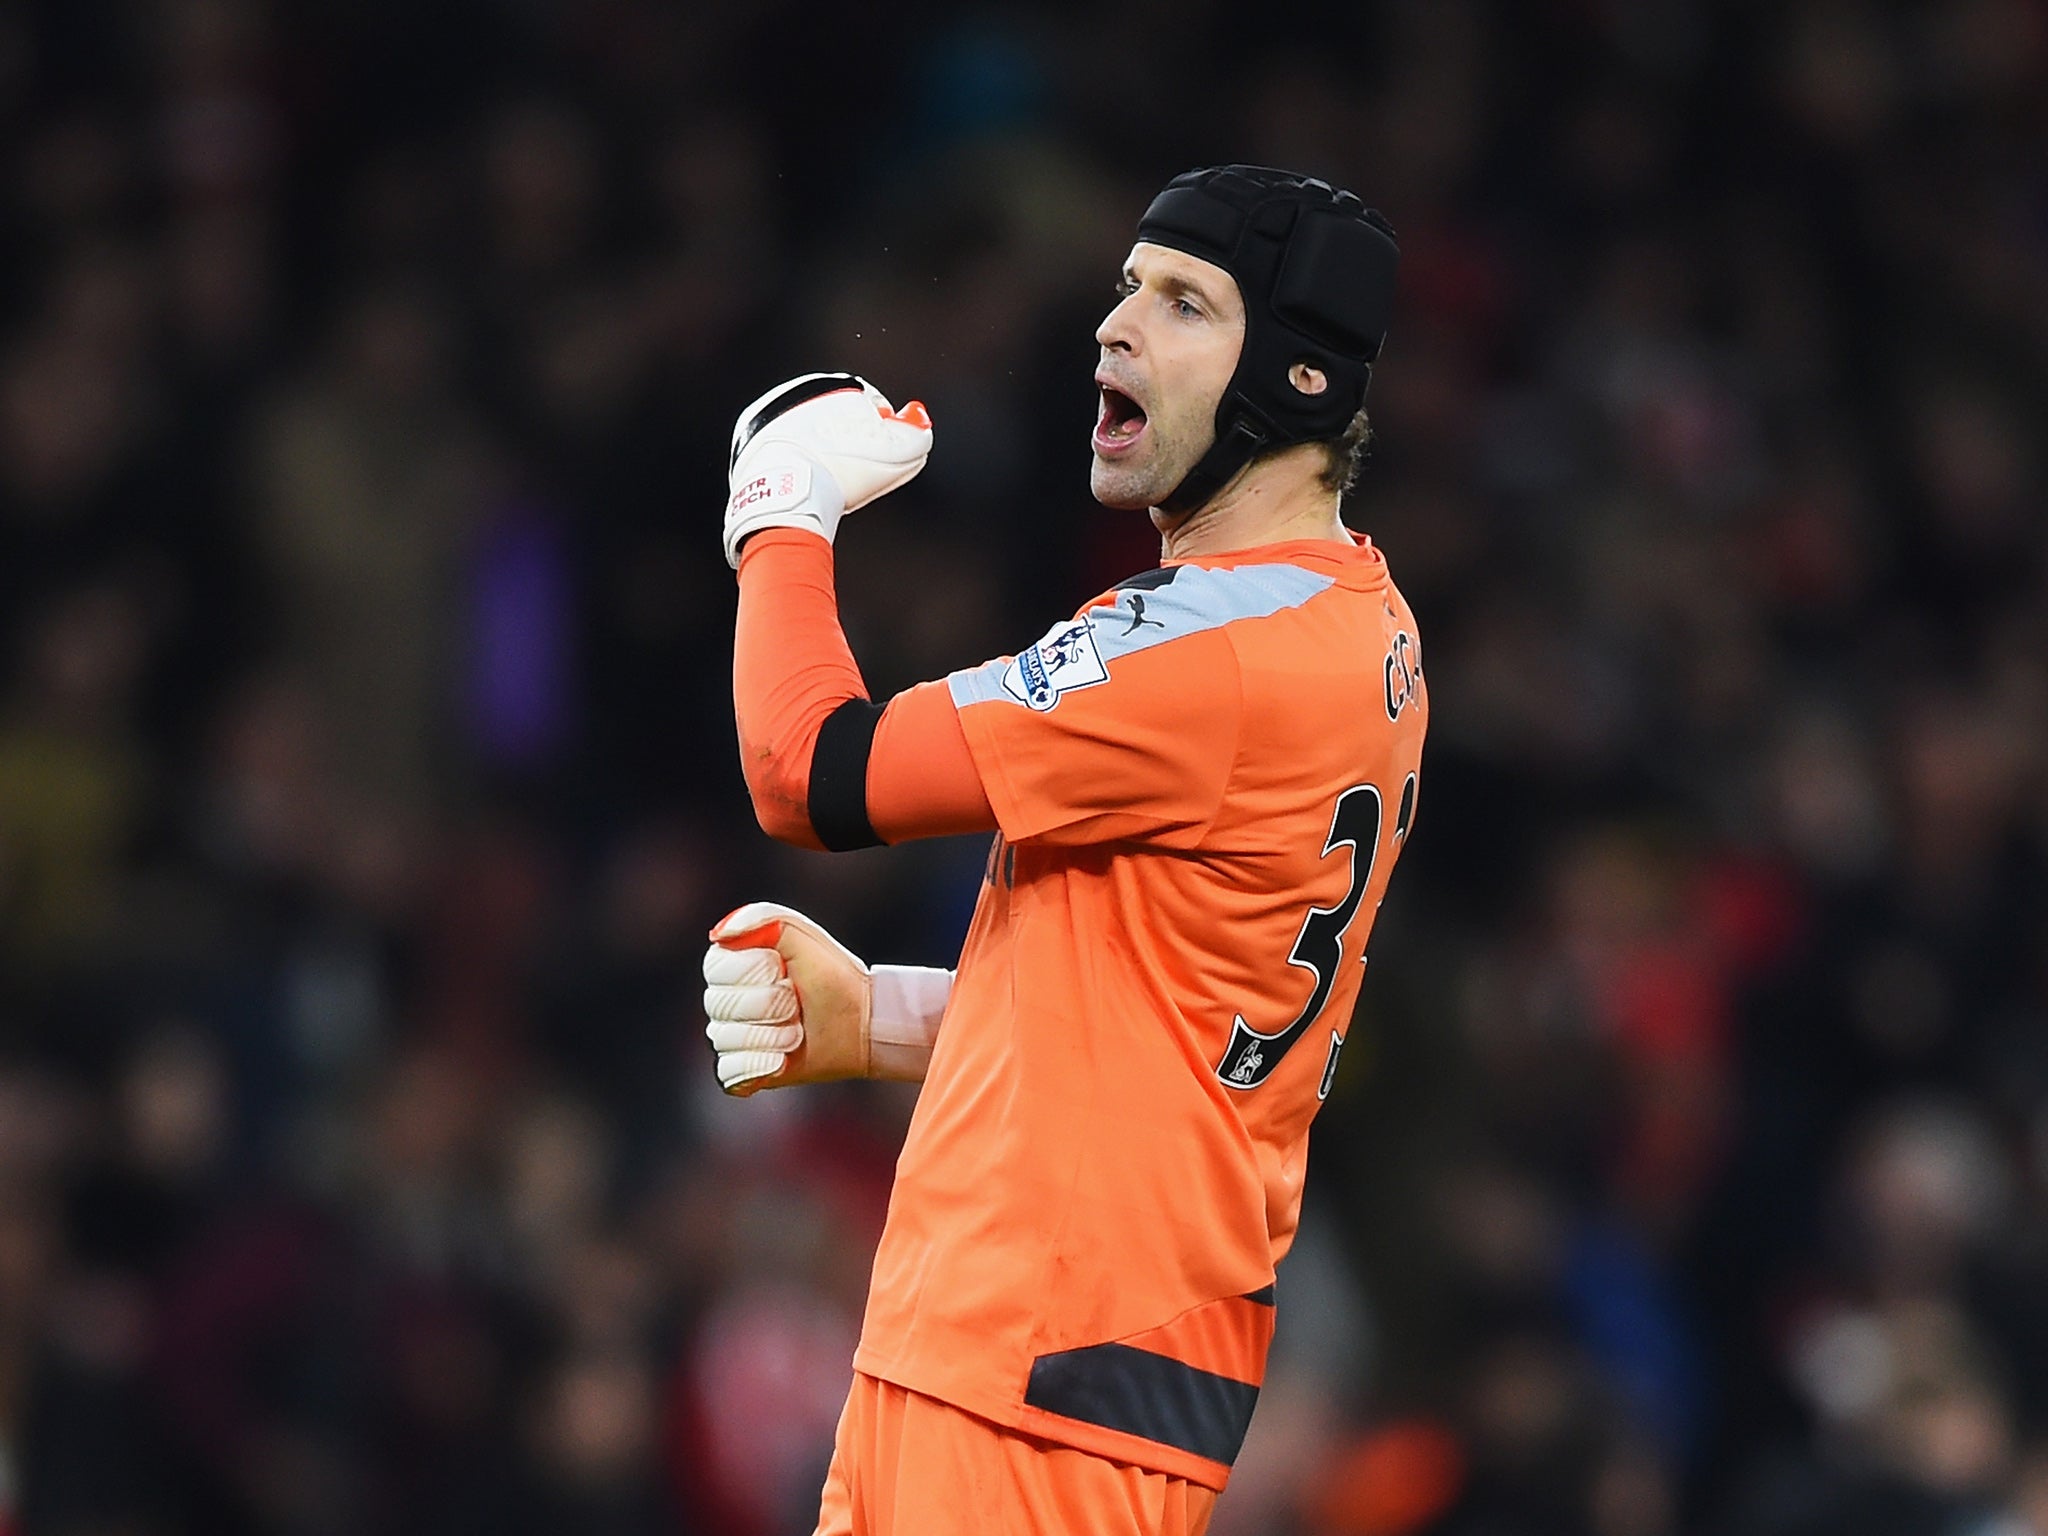 Arsenal goalkeeper Petr Cech celebrates the club's win over Bournemouth